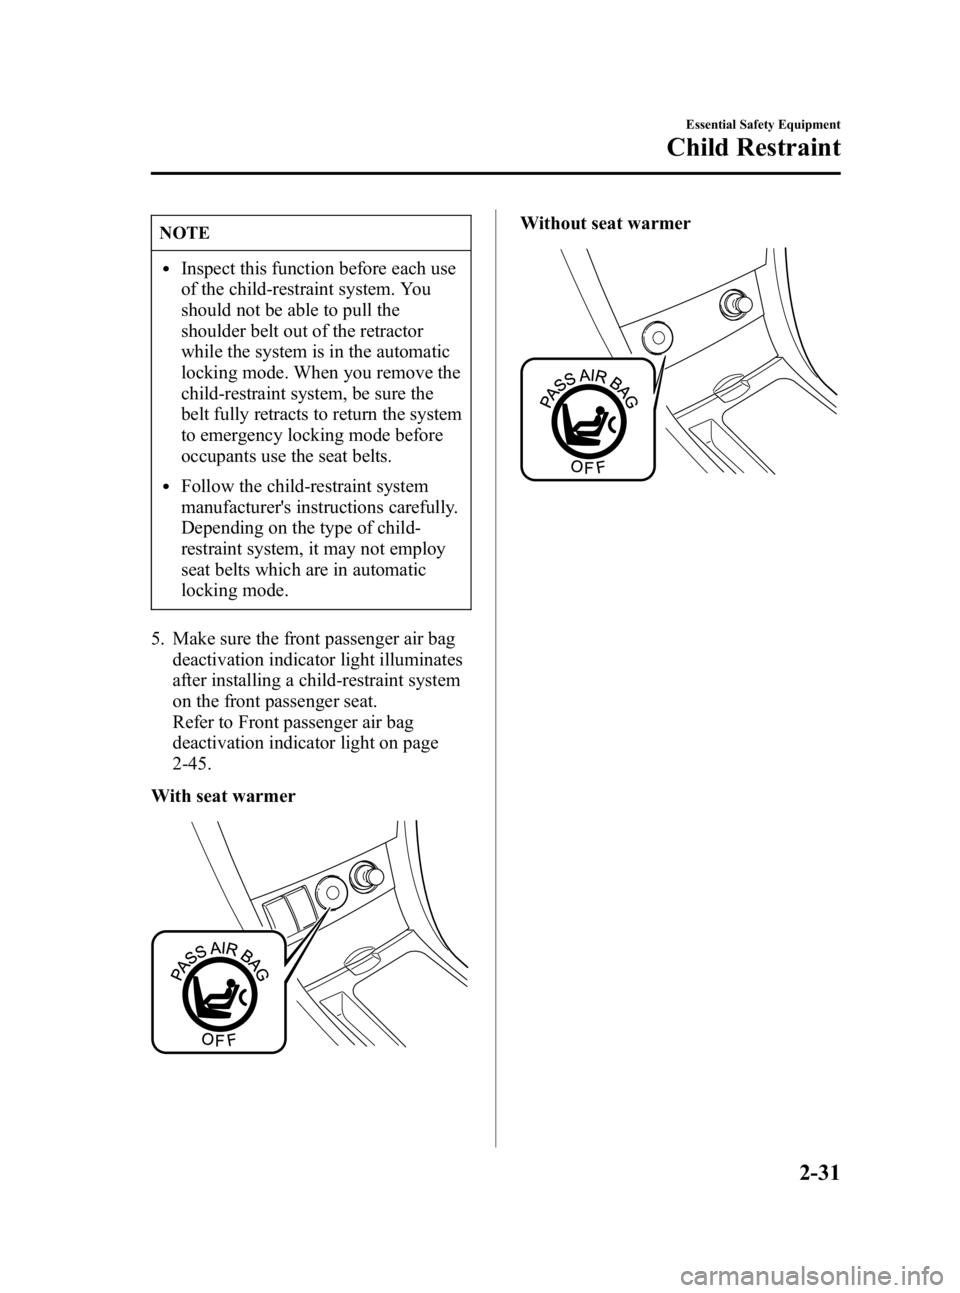 MAZDA MODEL 3 5-DOOR 2005 Service Manual Black plate (45,1)
NOTE
lInspect this function before each use
of the child-restraint system. You
should not be able to pull the
shoulder belt out of the retractor
while the system is in the automatic